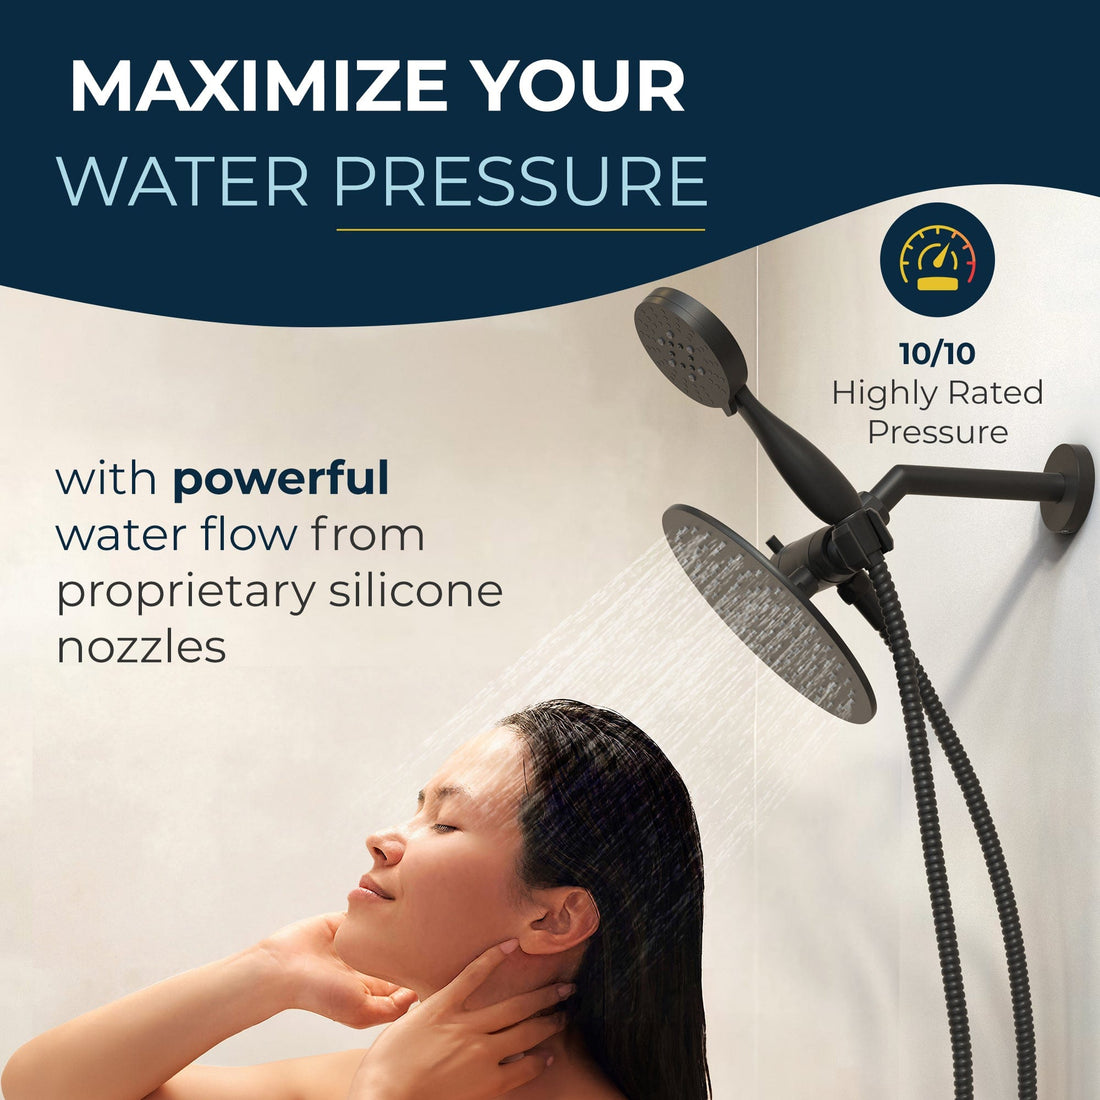 Maximize Your Water Pressure 3-Spray Dual Shower Head Matte Black / 2.5 - The Shower Head Store